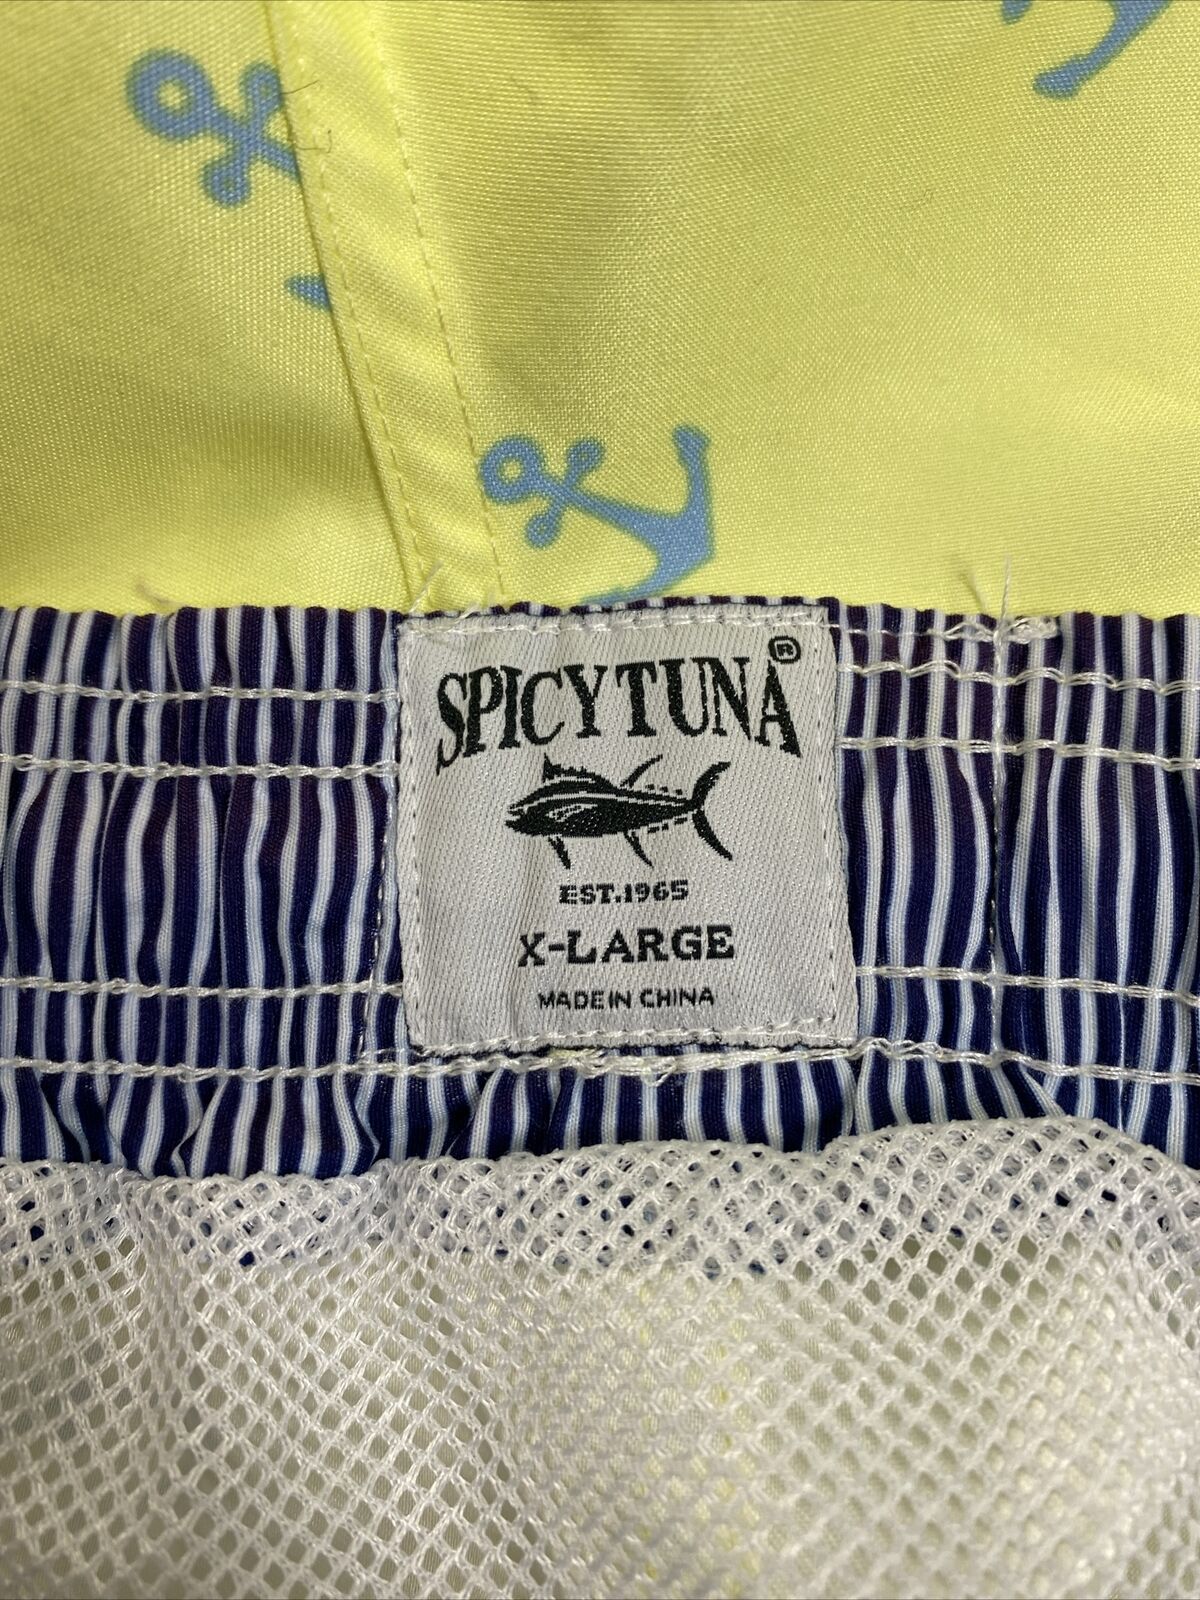 NEW Spicy Tuna Men's Yellow Anchor Mesh Lined Swim Trunks Shorts - XL